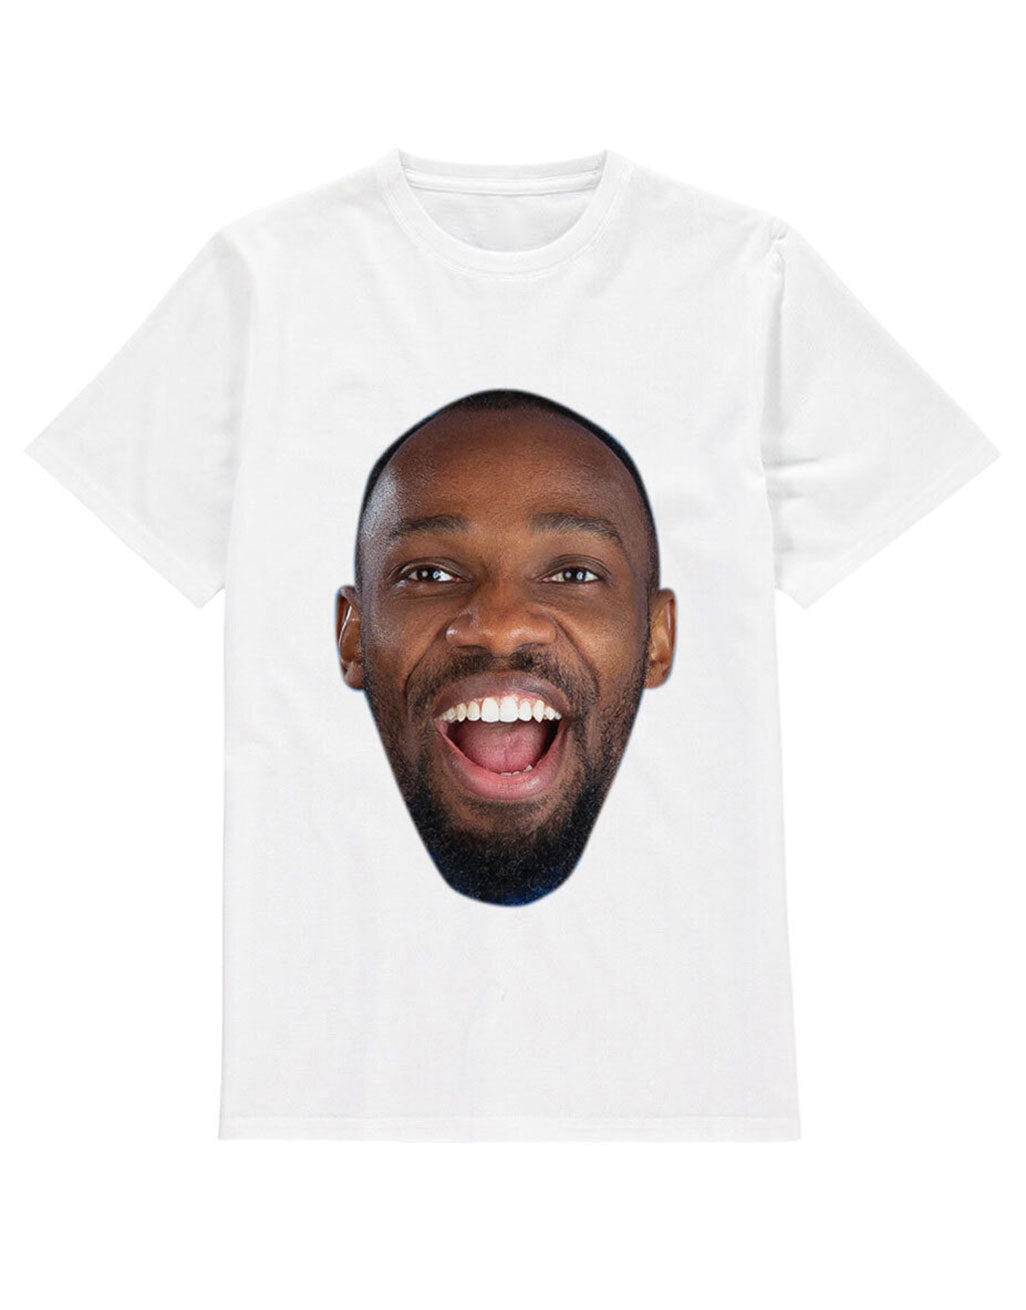 Personalized t shirt with your face on